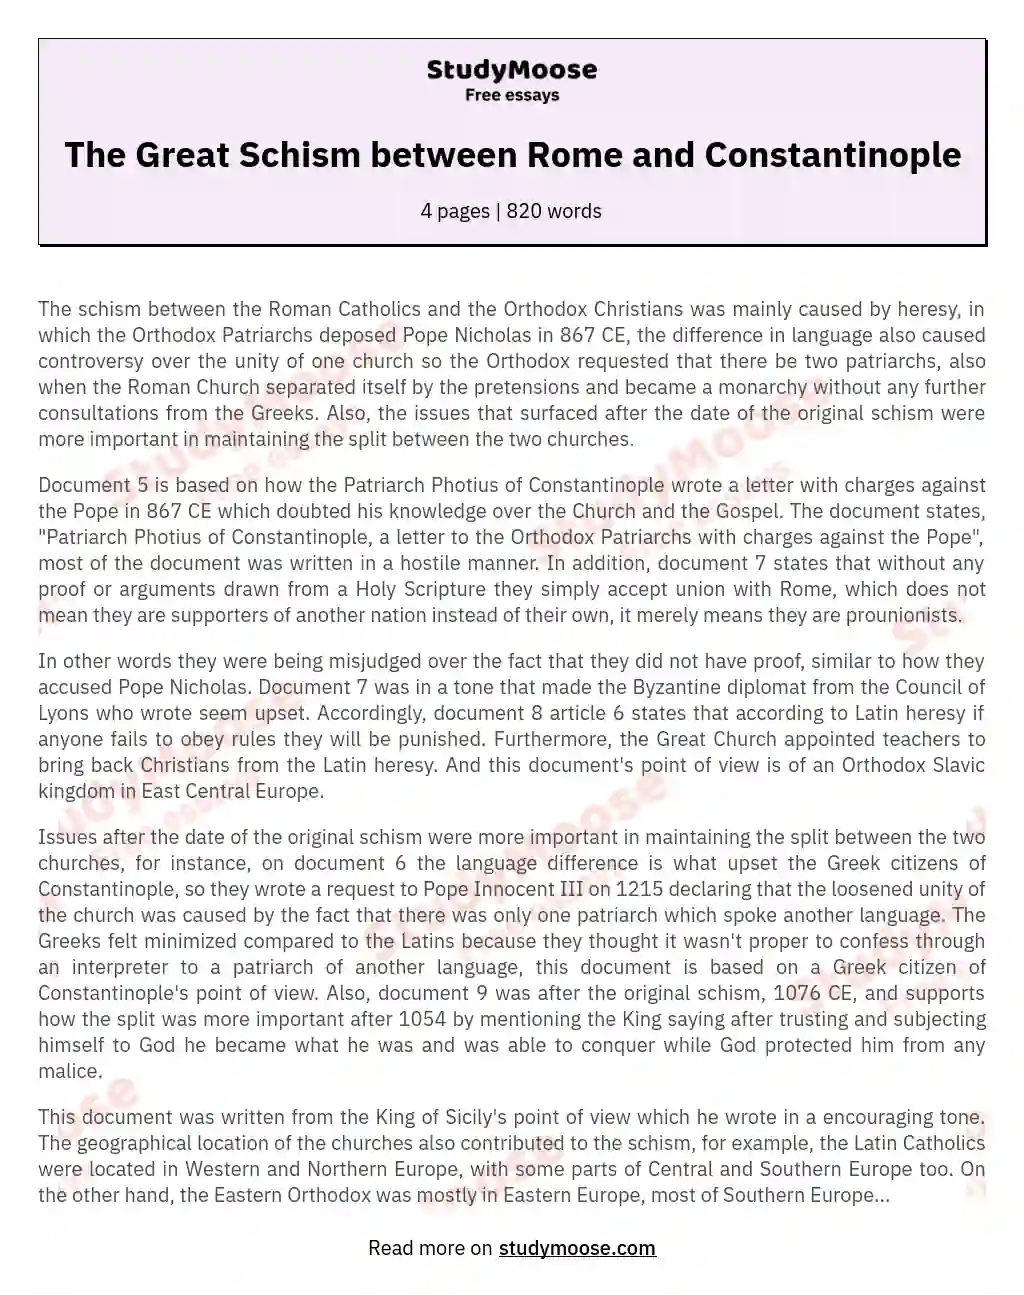 The Great Schism between Rome and Constantinople essay